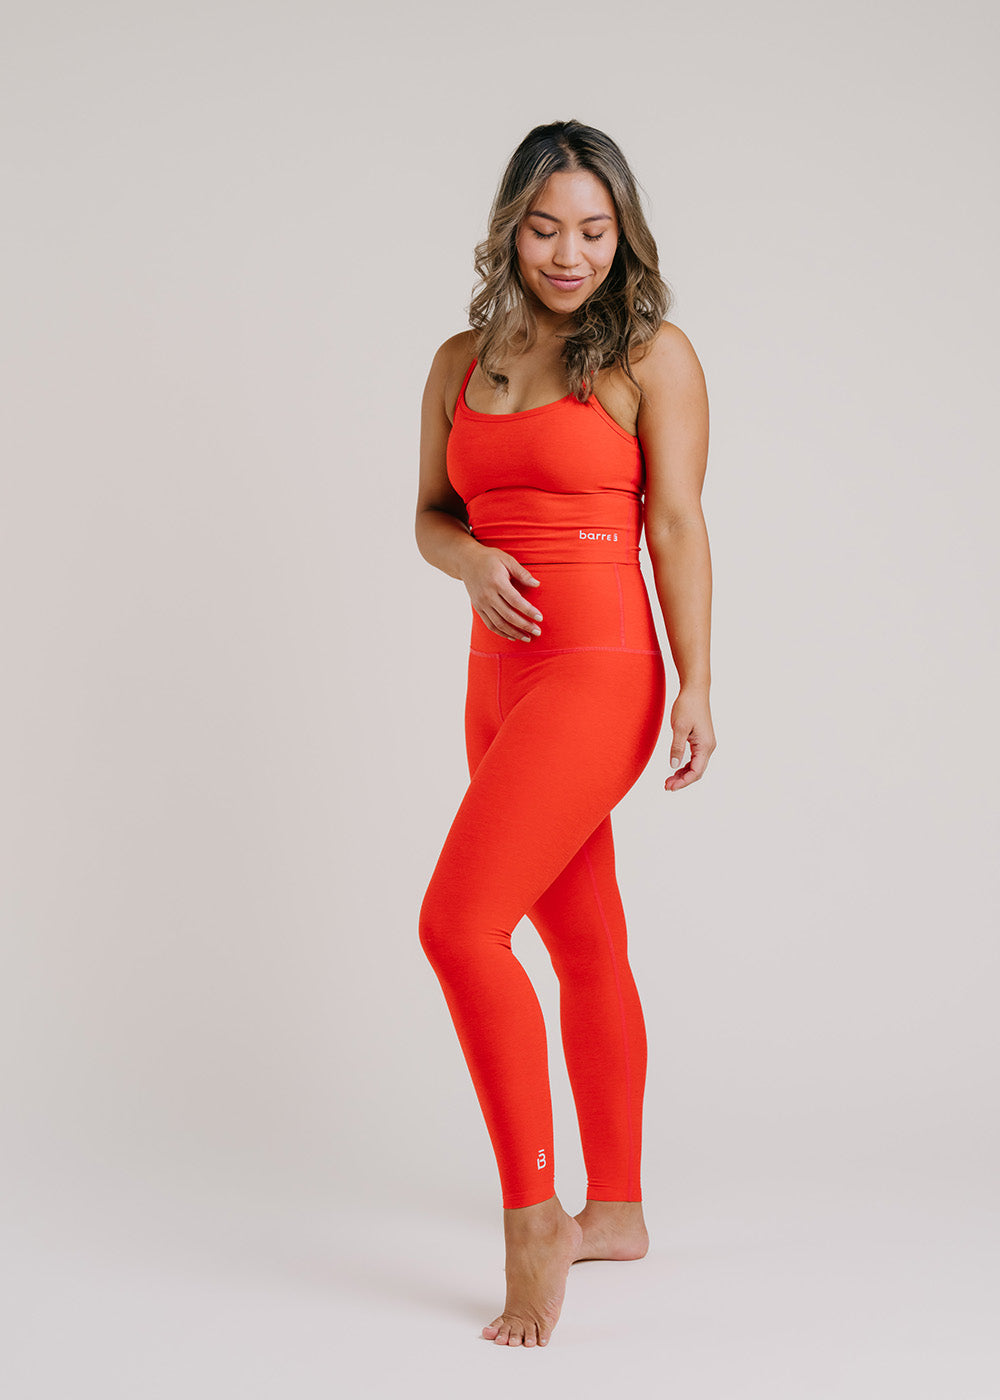 Beyond Yoga Spacedye At Your Leisure High Waisted Midi Legging In Red -  Candy Apple Red Heather